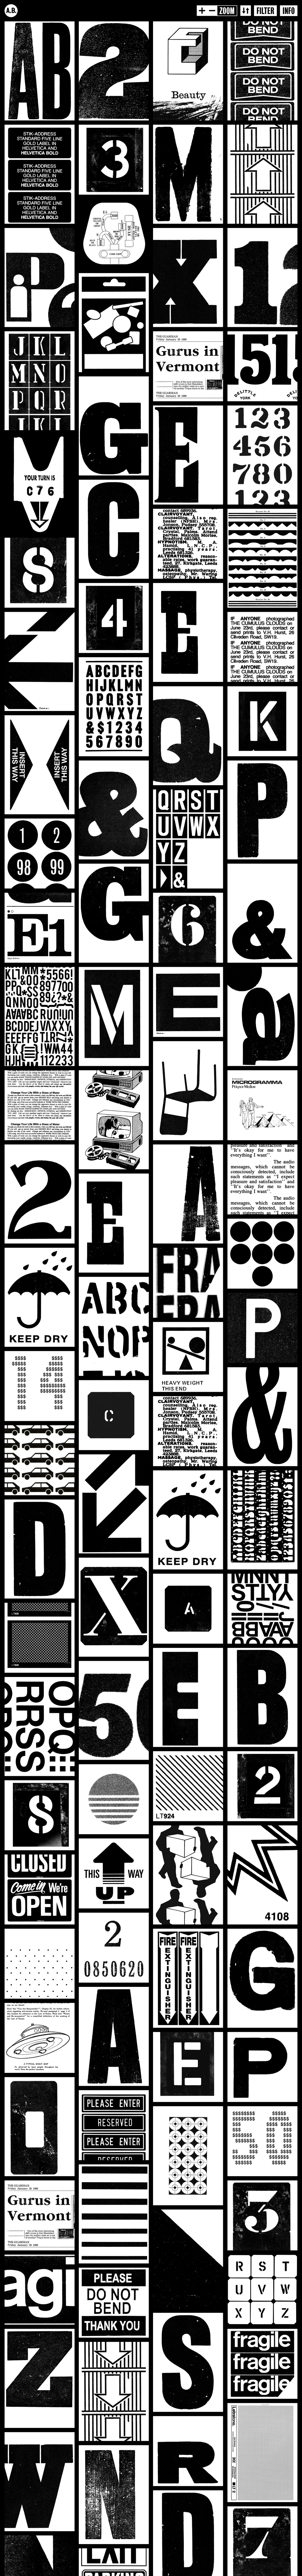 Anthony Burrill Landing Page Example: An archive curated by Anthony Burrill which gathers together over five hundred examples of inspiring lo-fi graphic design, characterful typography and discarded ephemera.